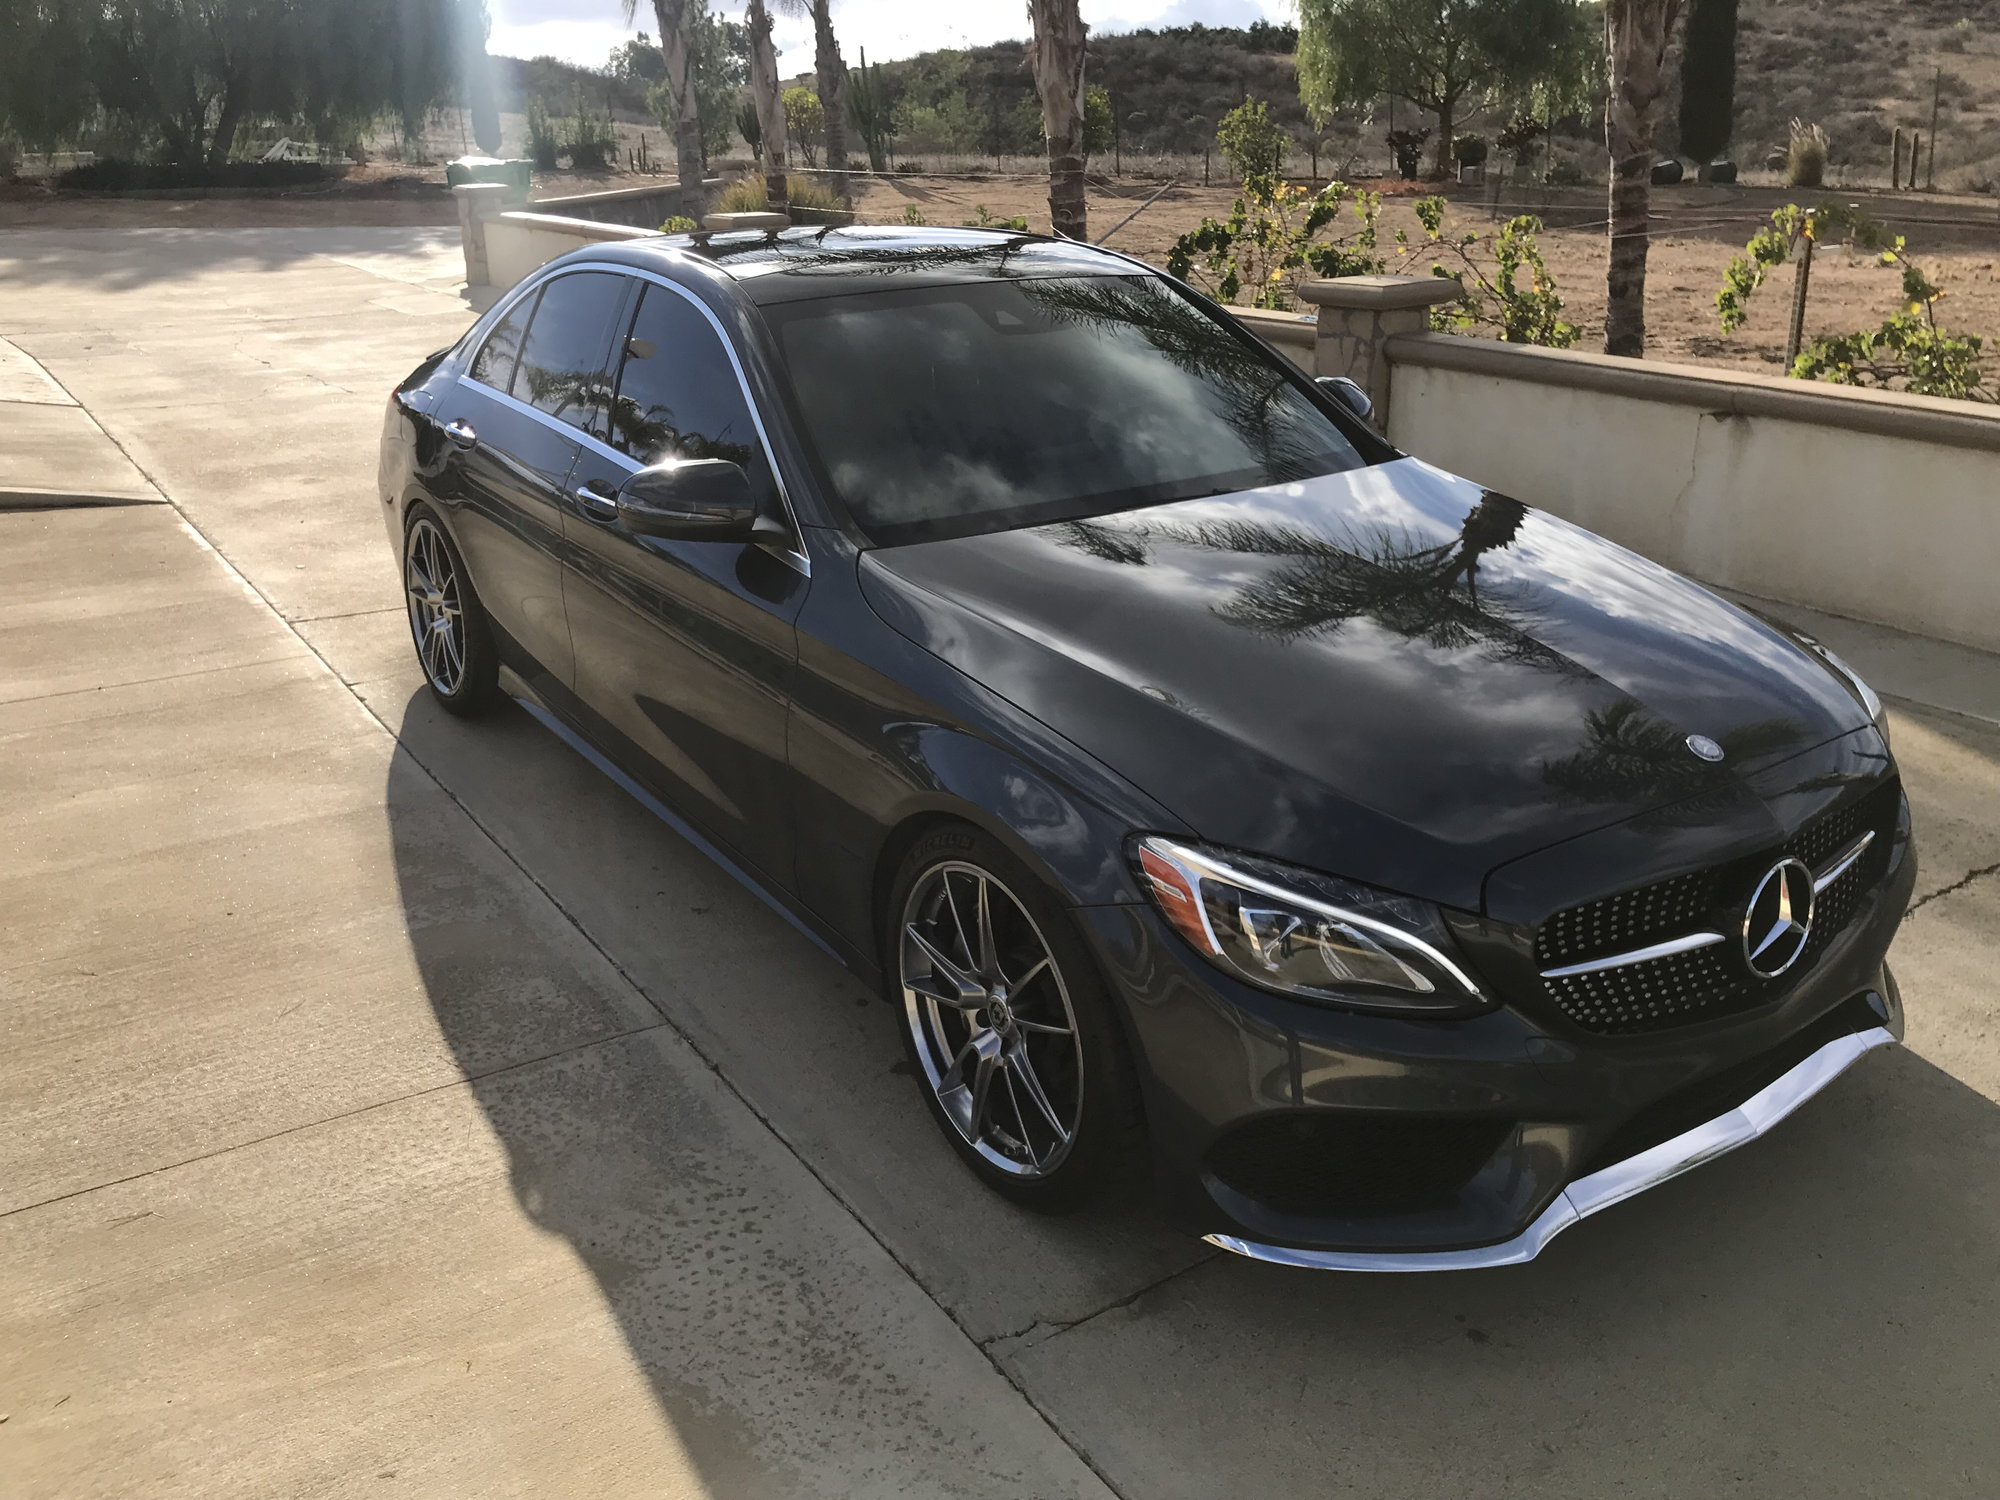 2016 Mercedes C300 Sport in excellent condition AMG package - MBWorld ...